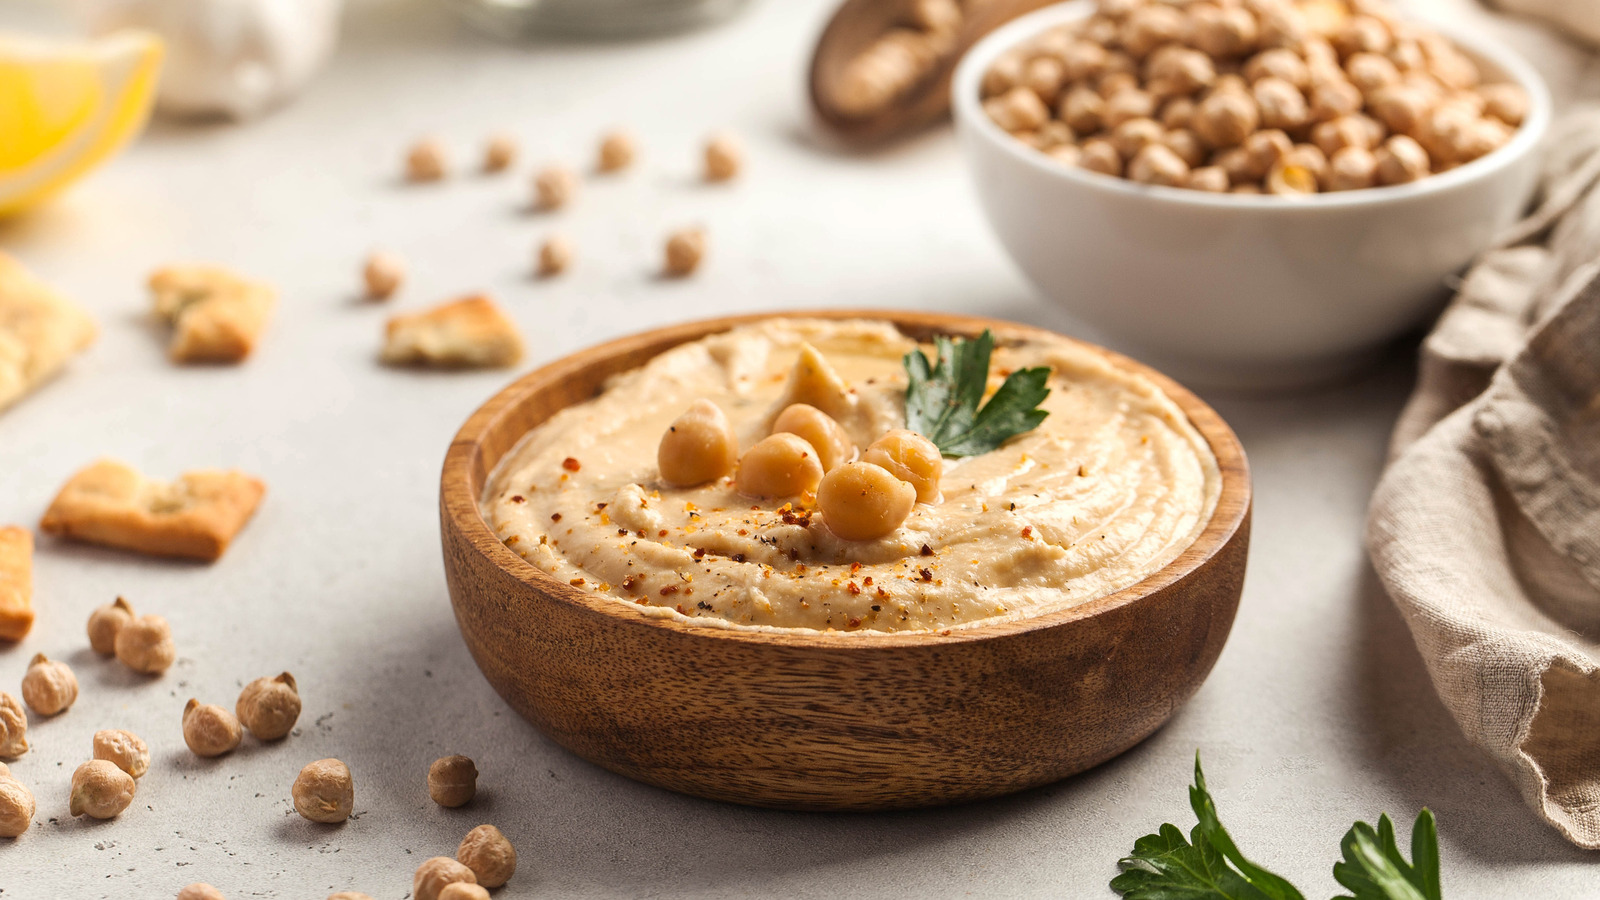 Why Hummus Will Likely Become More Expensive